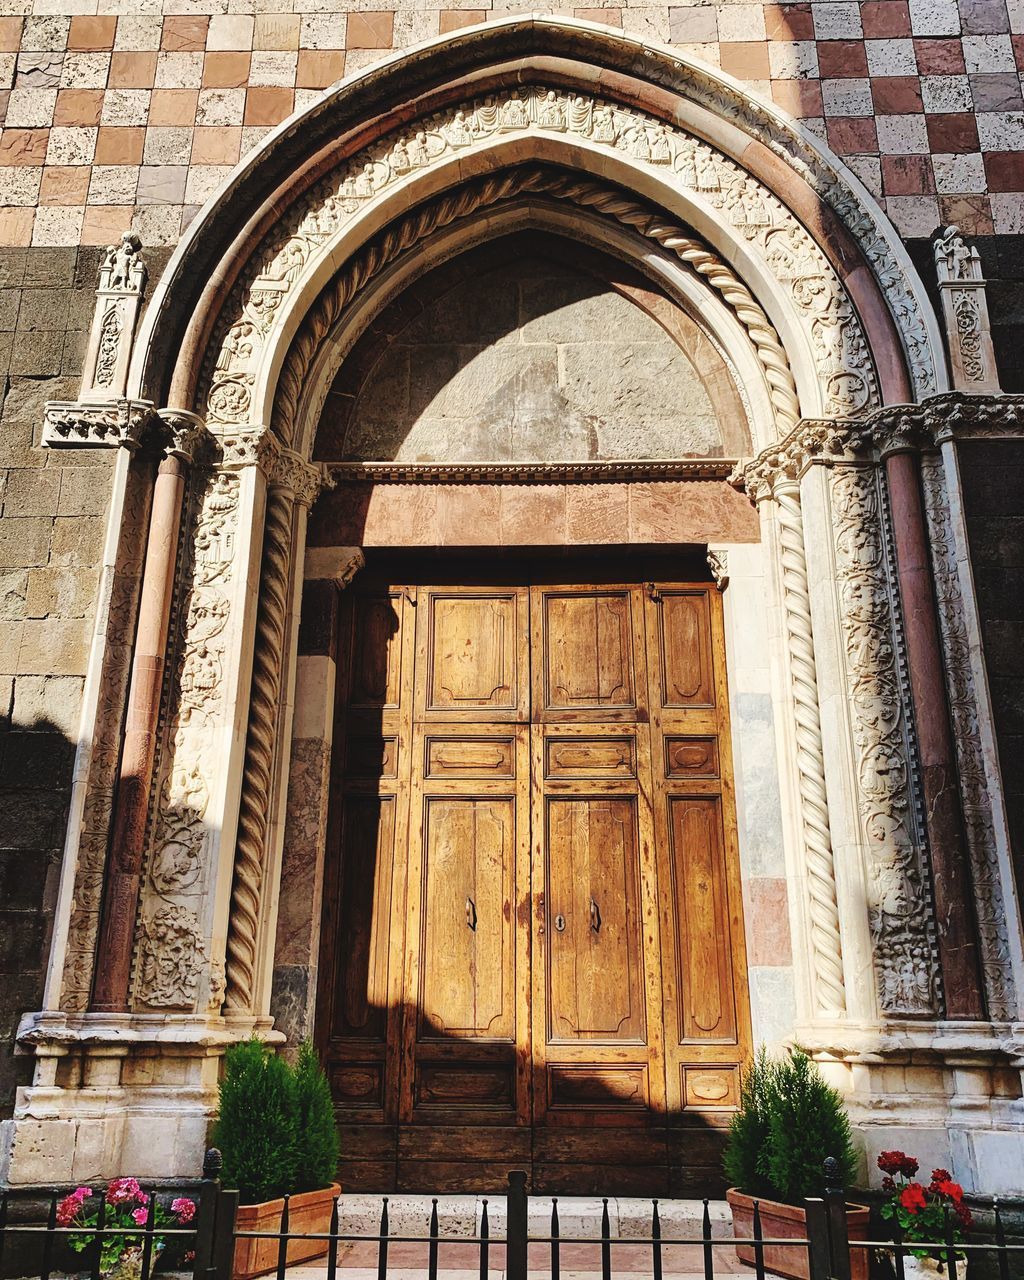 LOW ANGLE VIEW OF ORNATE DOOR OF BUILDING